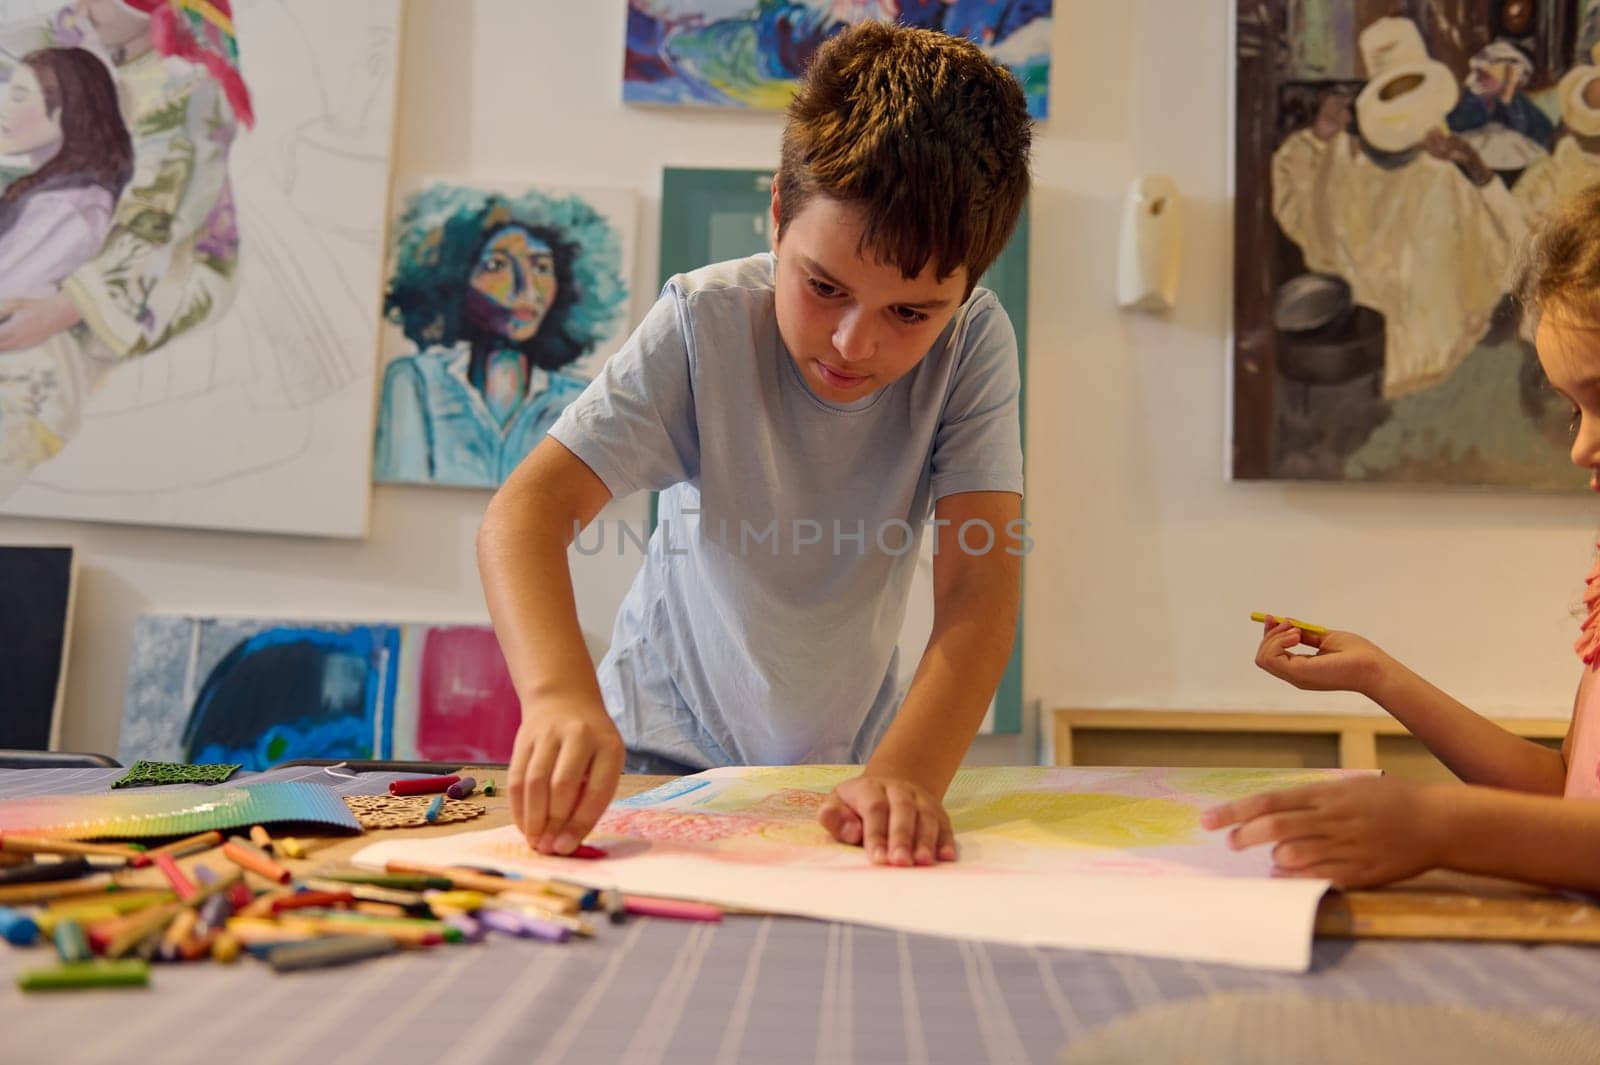 Teenage schoolboy taking pencil from the pile of colorful pencils, drawing picture in the creative art school by artgf